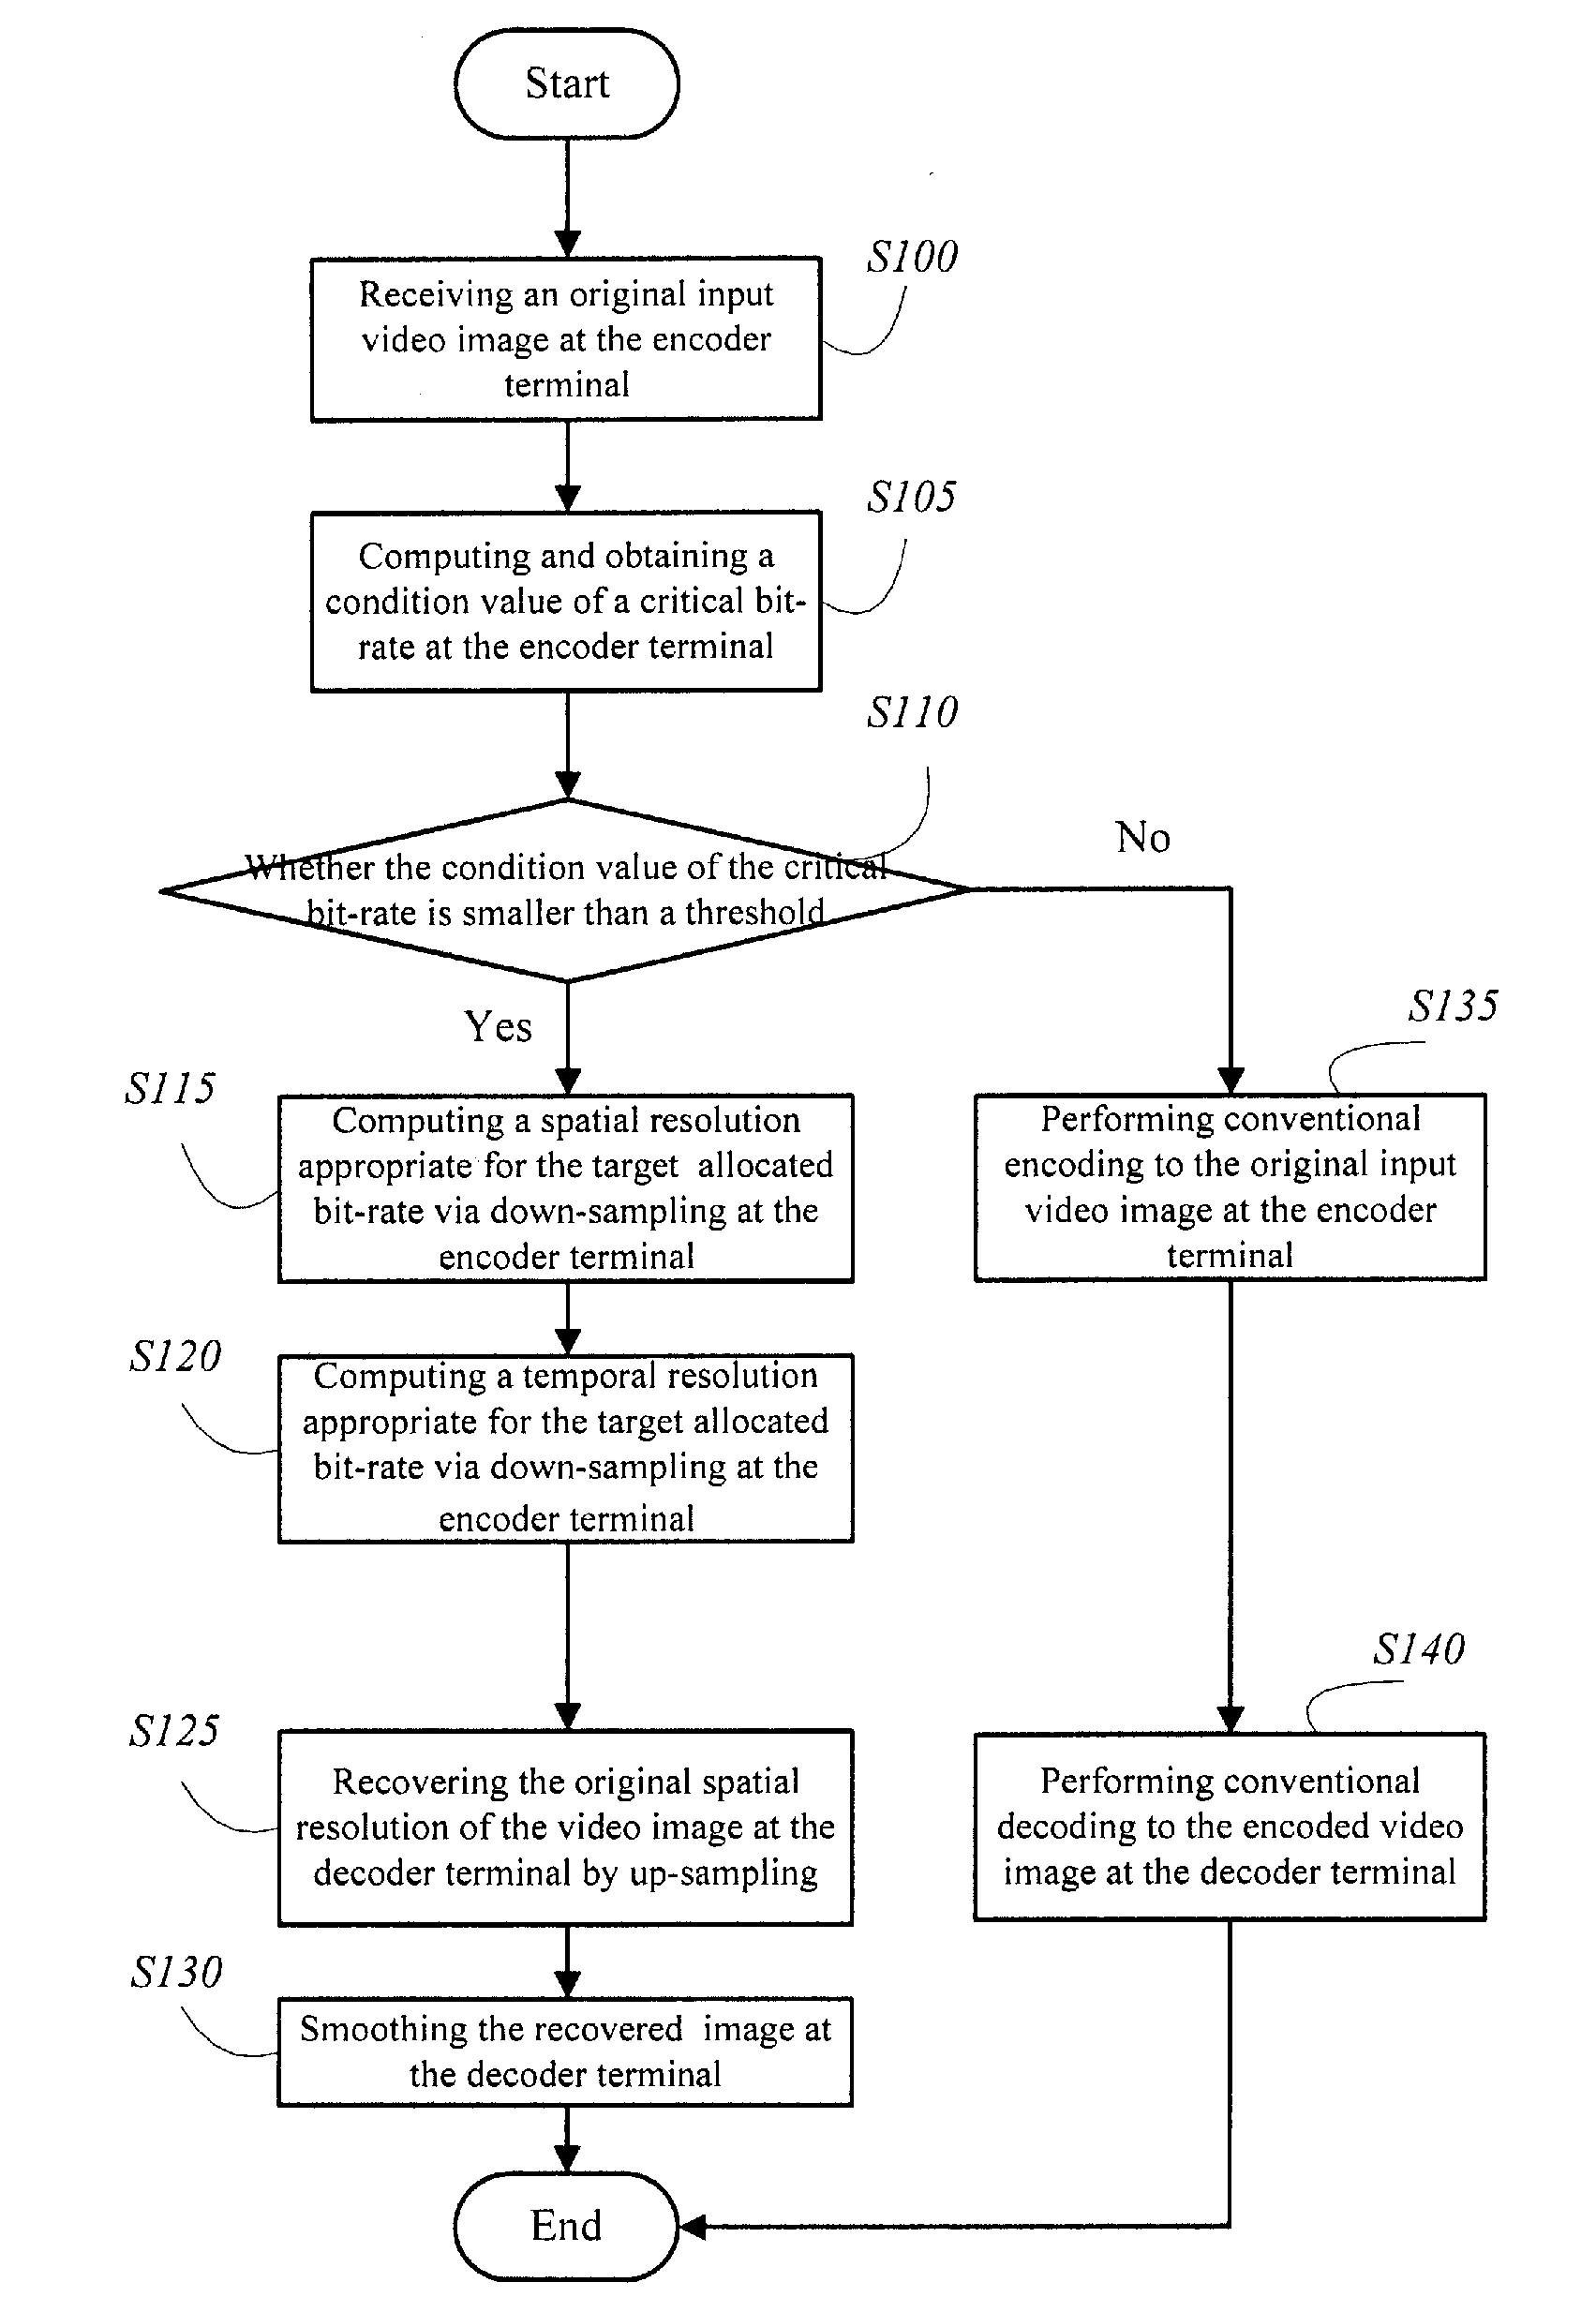 Image processing method for adaptive spatial-temporal resolution frame